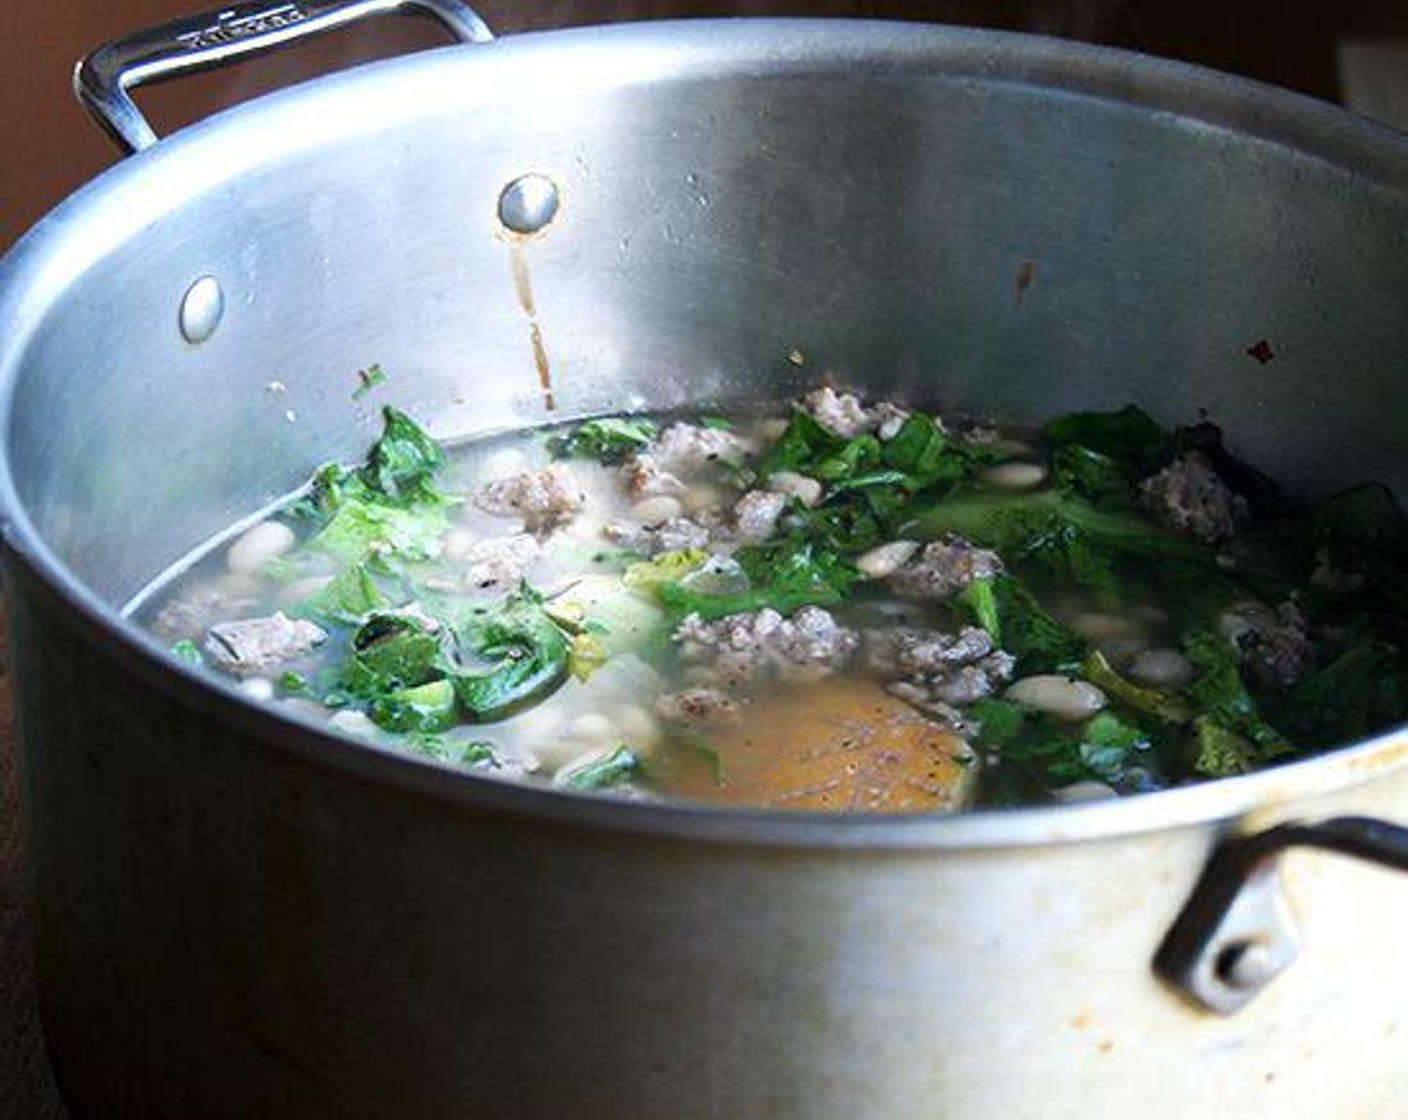 step 6 Add a half pound of the escarole to the pot. Pat it down with a wooden spoon so that it’s submerged. Once it has wilted, add the sausage. Stir. If the soup looks like it needs more beans and greens, add them; if you like your soup on the brothier side, let it be.